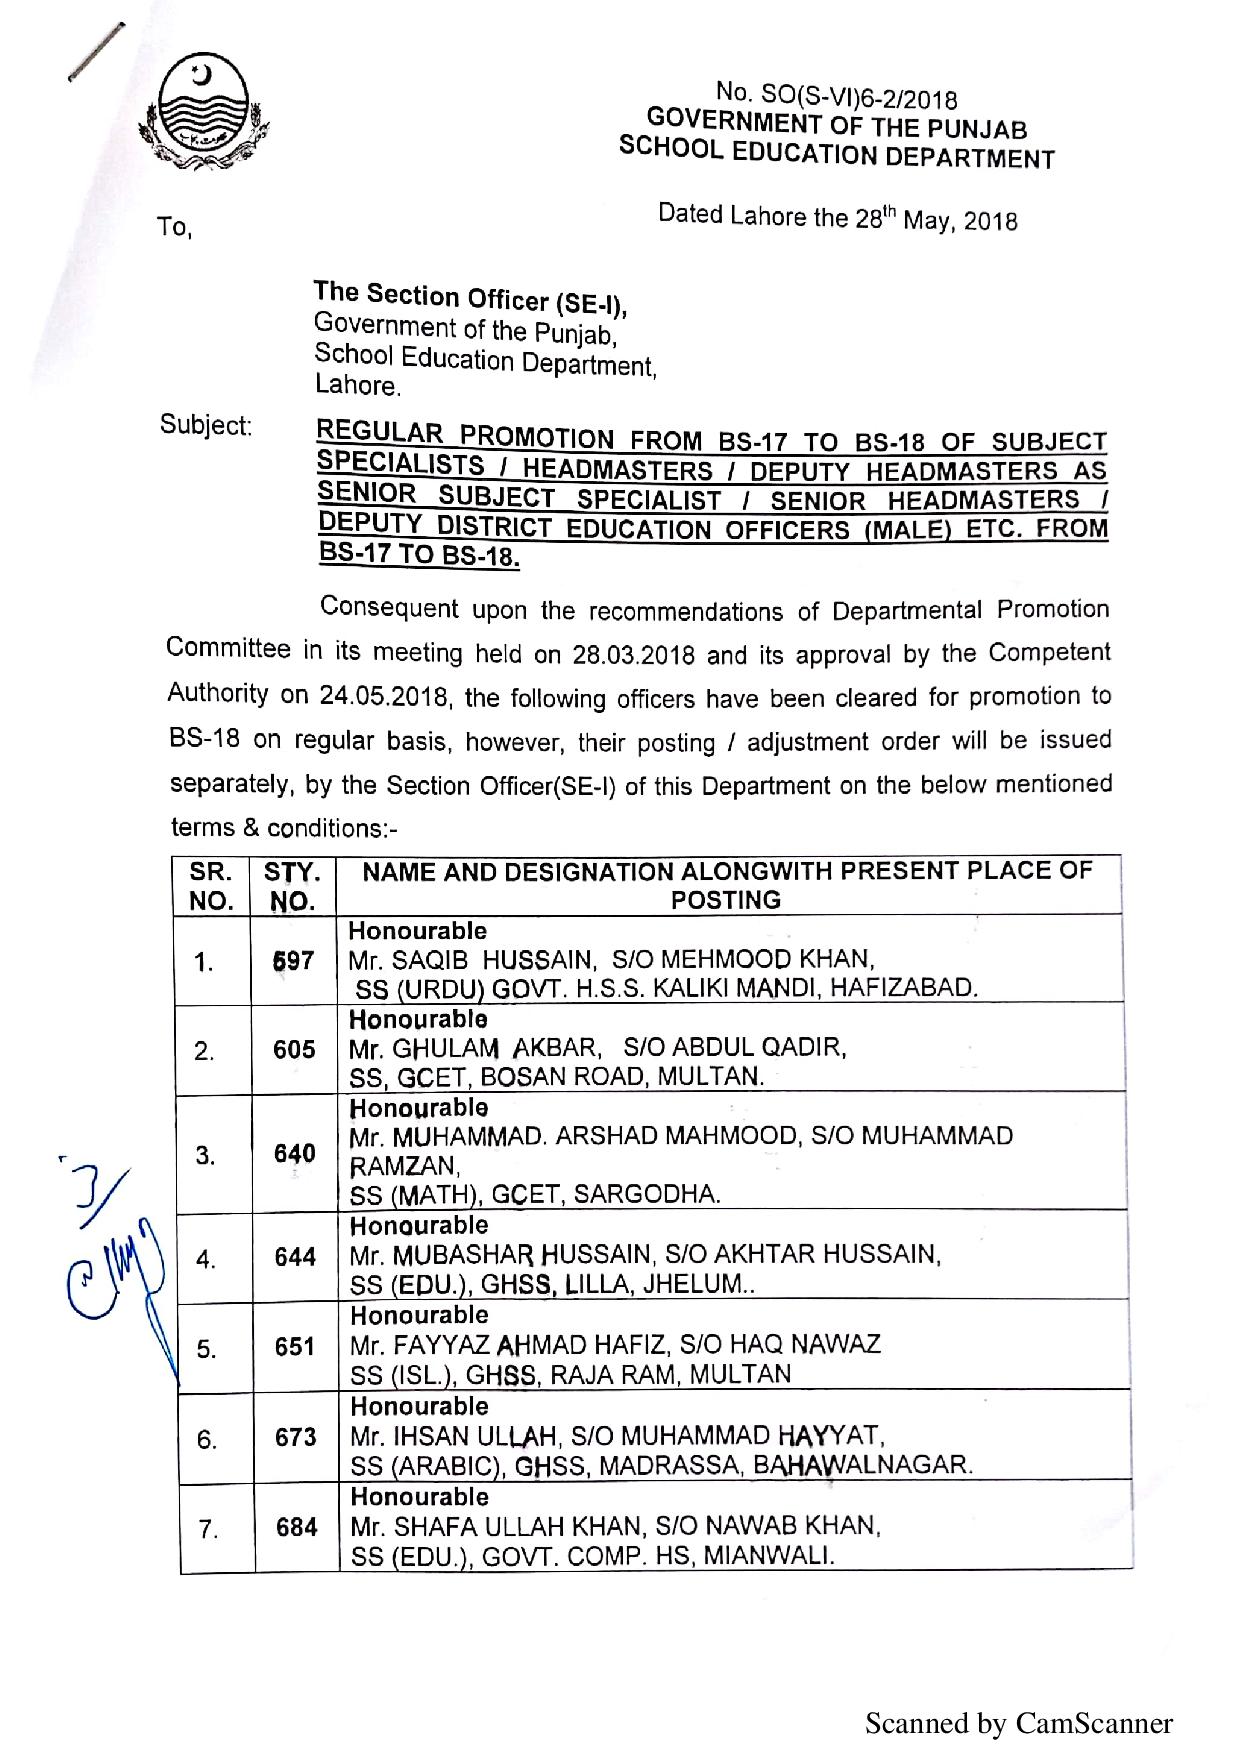 REGULAR PROMOTION of MALE FROM BPS-17 TO BPS-18 IN Punjab School Education Department